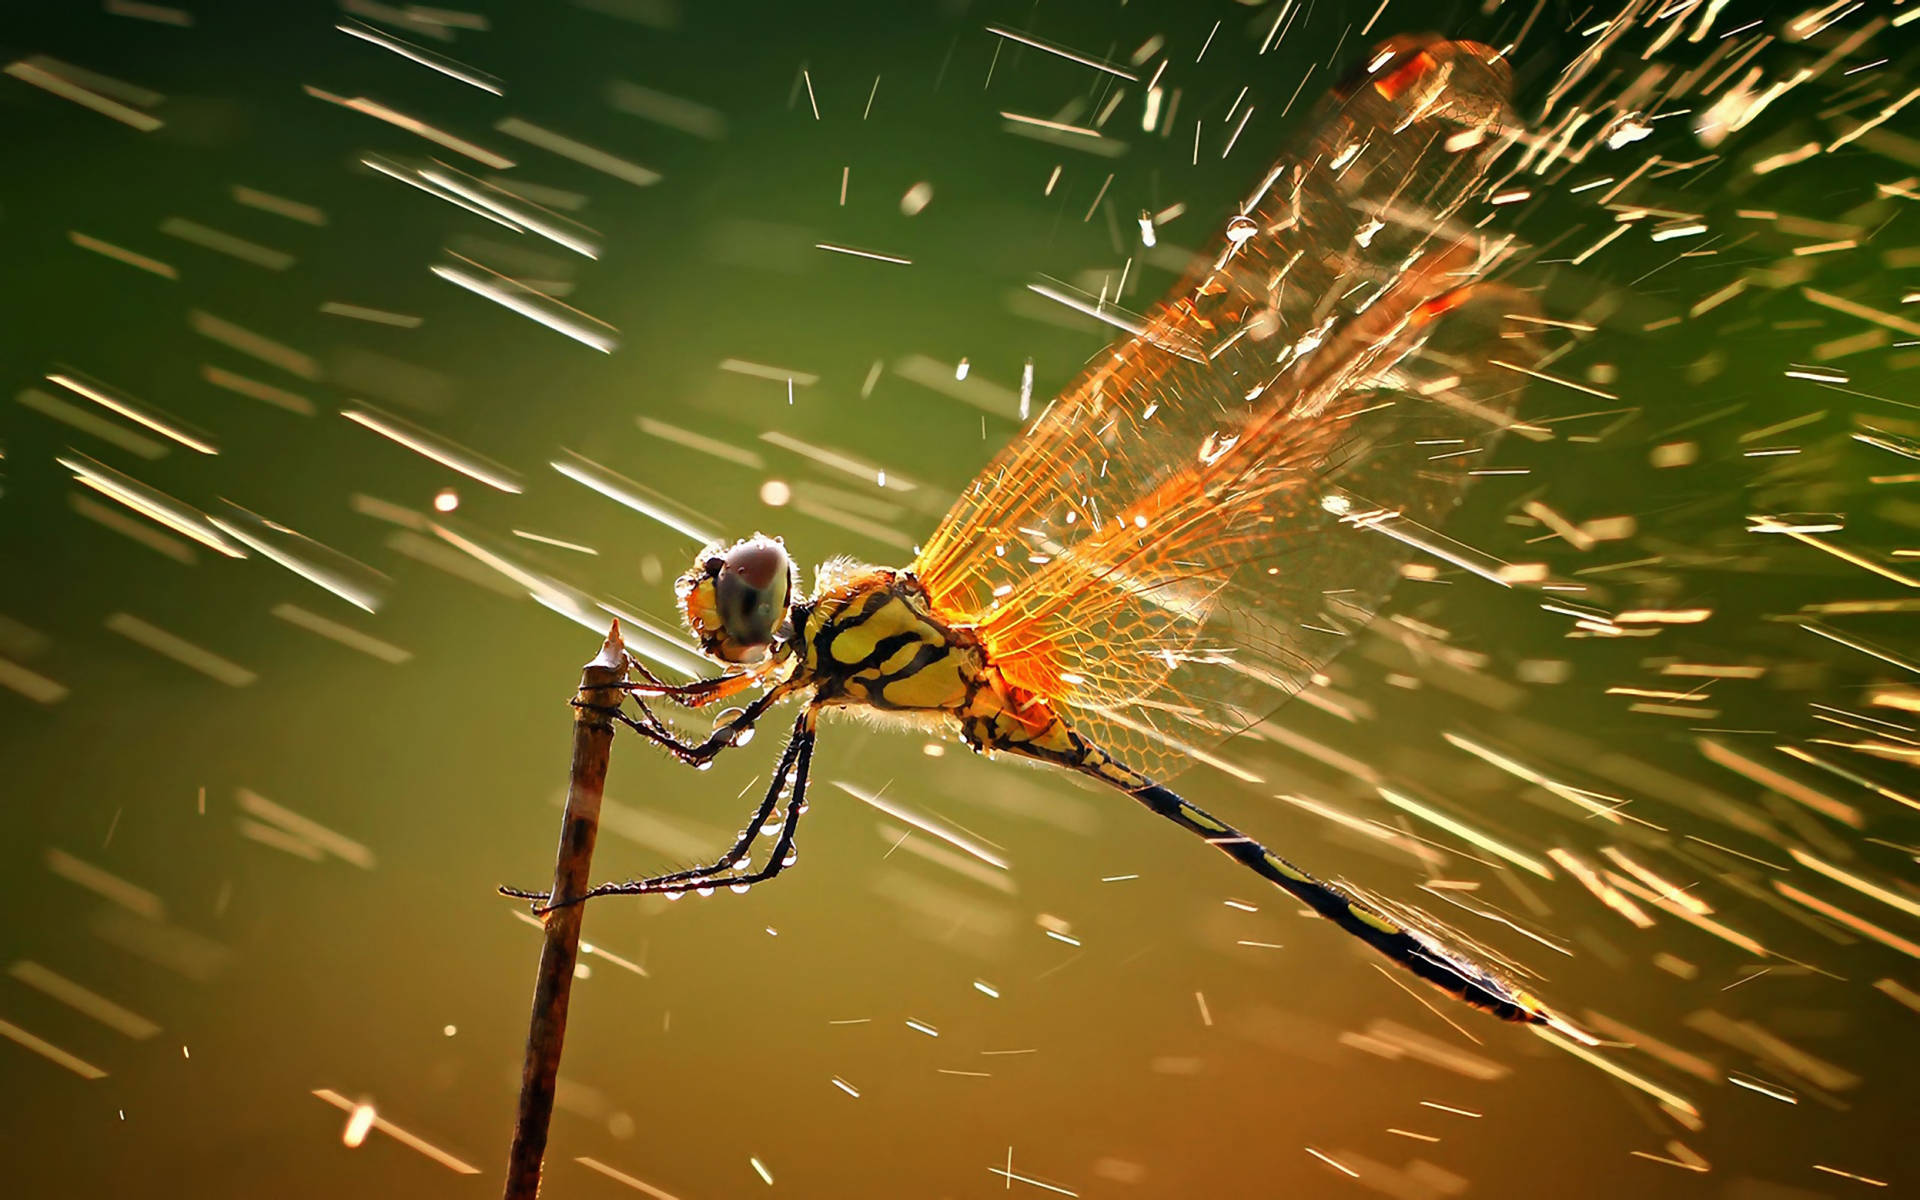 Insect Dragonfly With Splashing Water Background